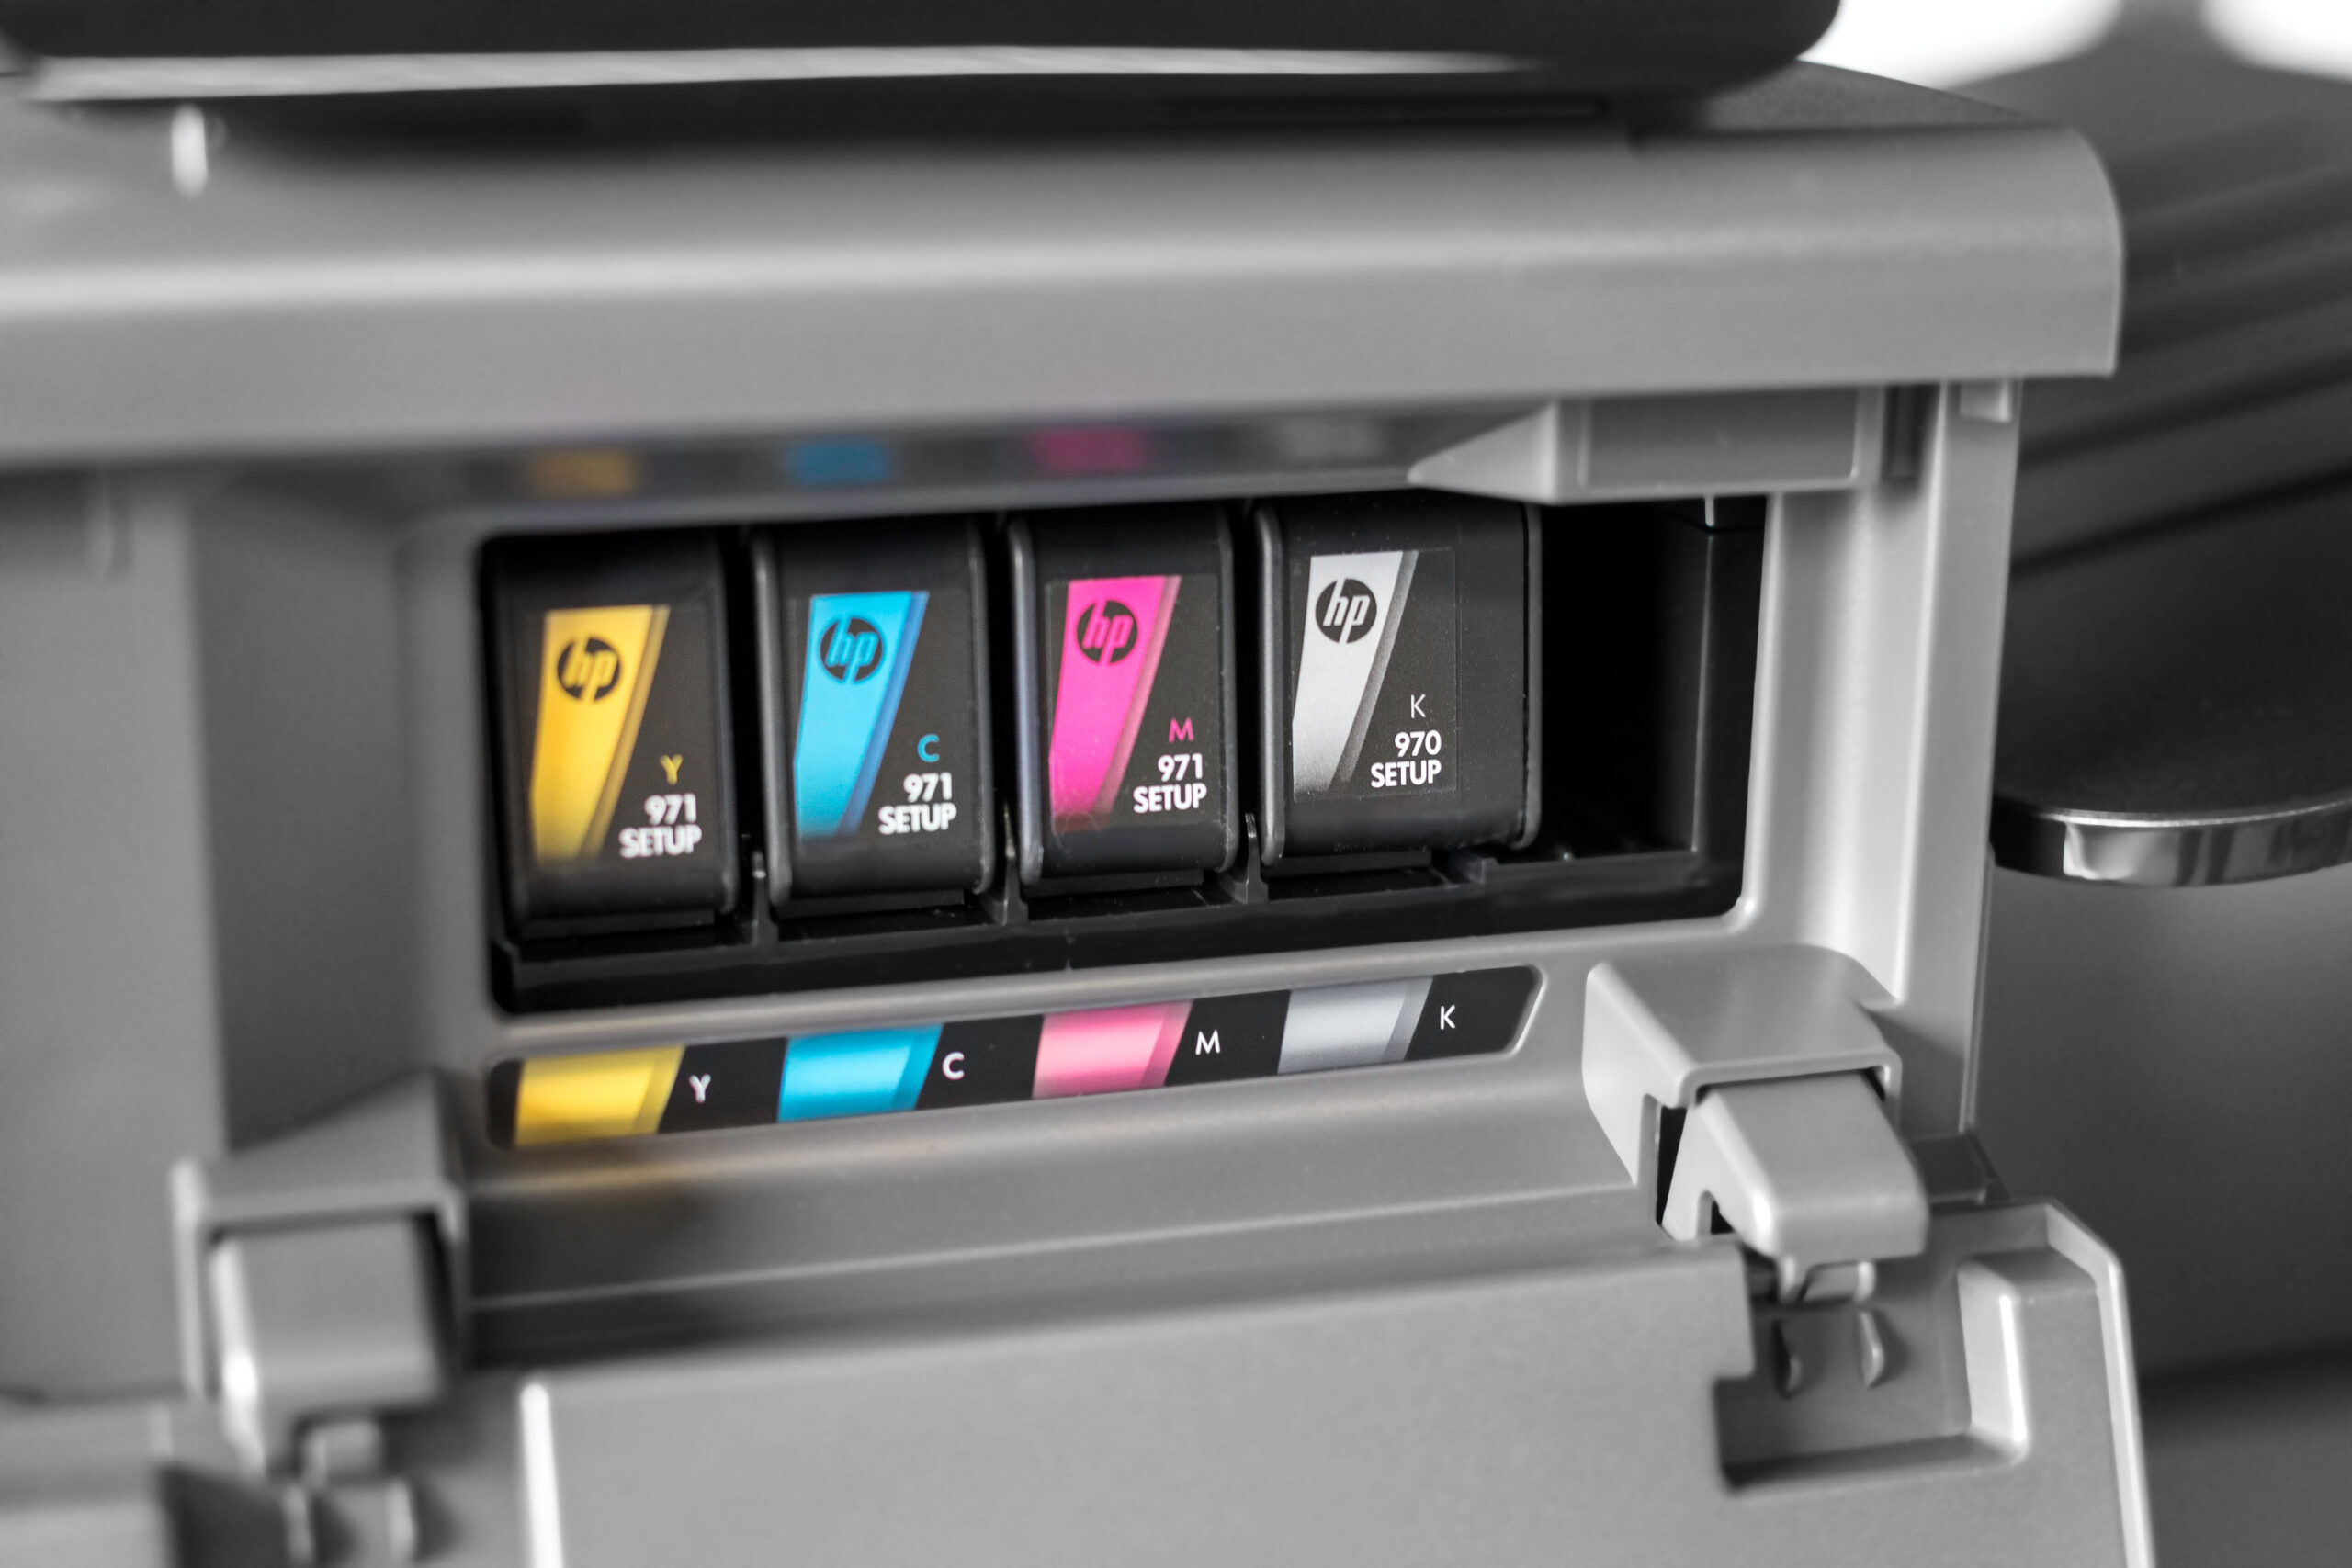 How Much Does A Printer Ink Cost